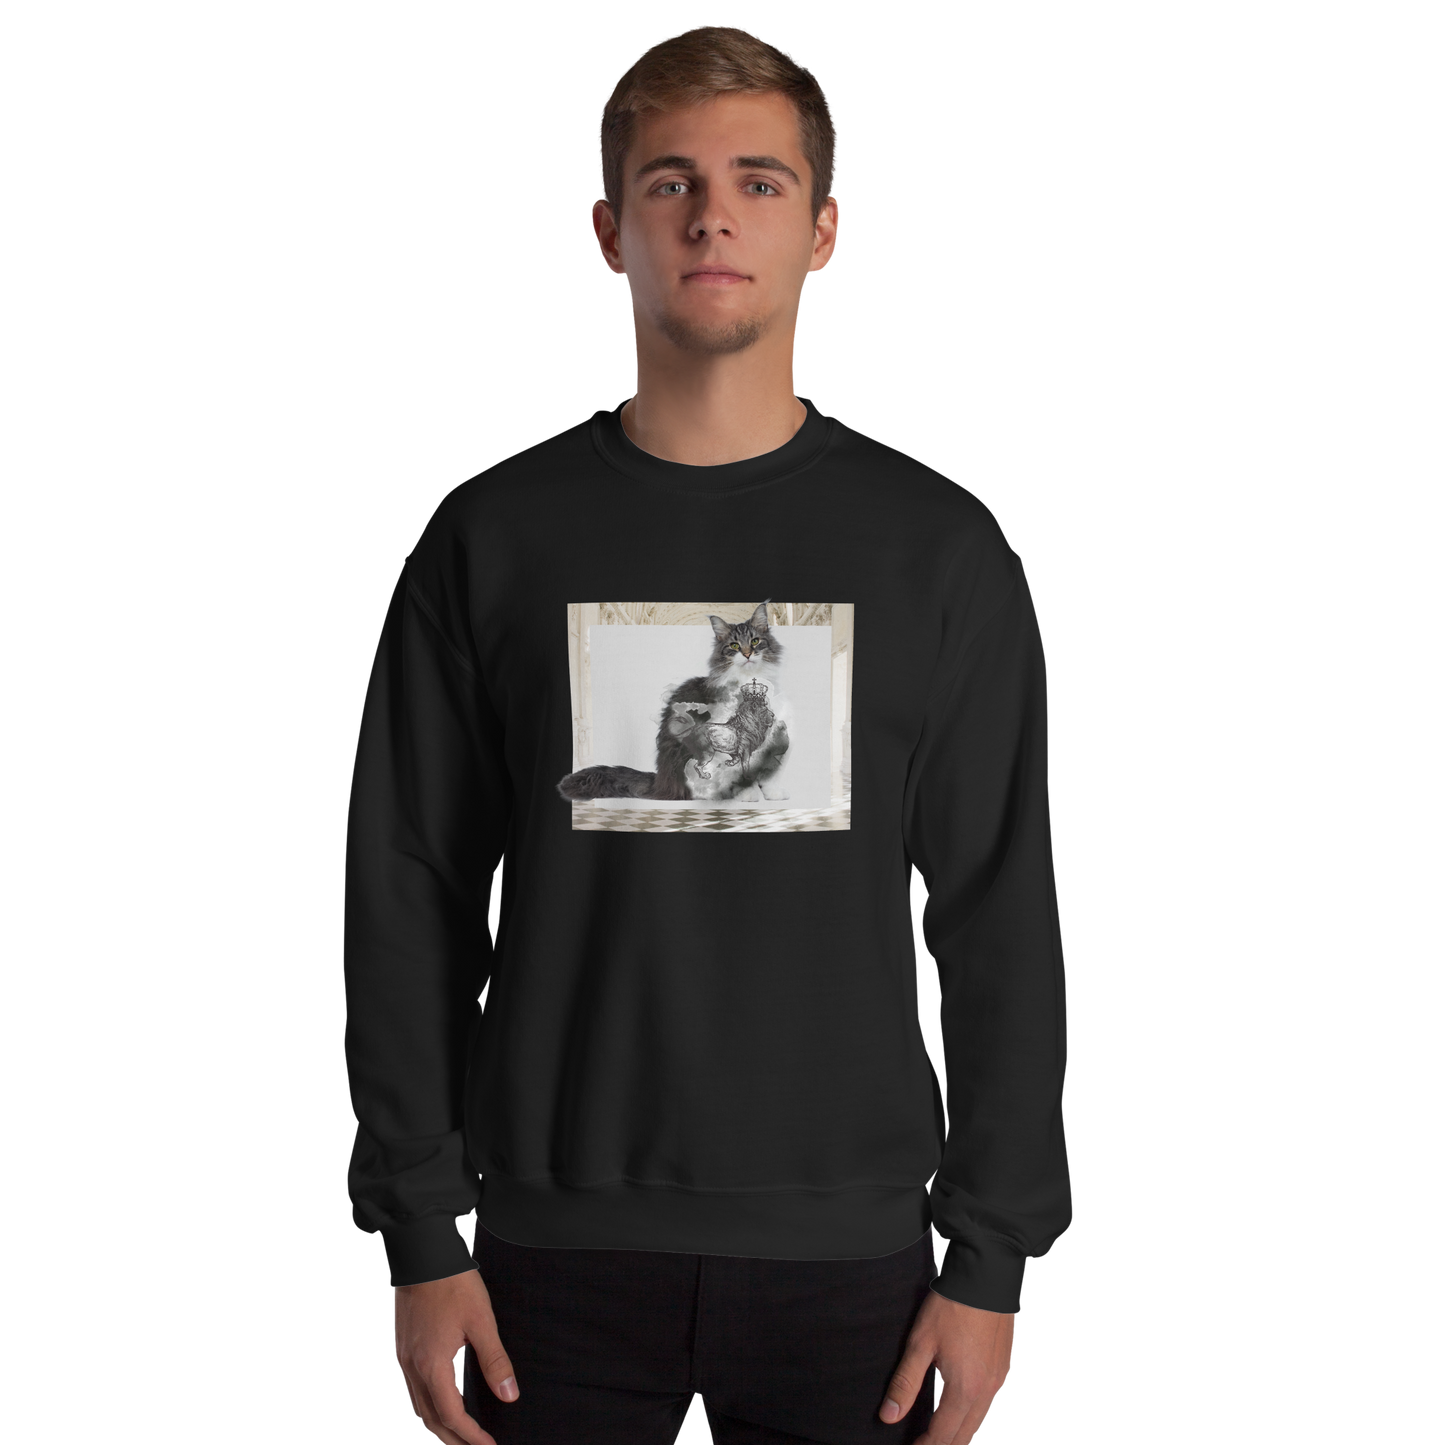 Man wearing a Black Royal Cat Sweatshirt featuring a Majestic Cat graphic on the chest - Cute Graphic Cat Sweatshirts - Boozy Fox